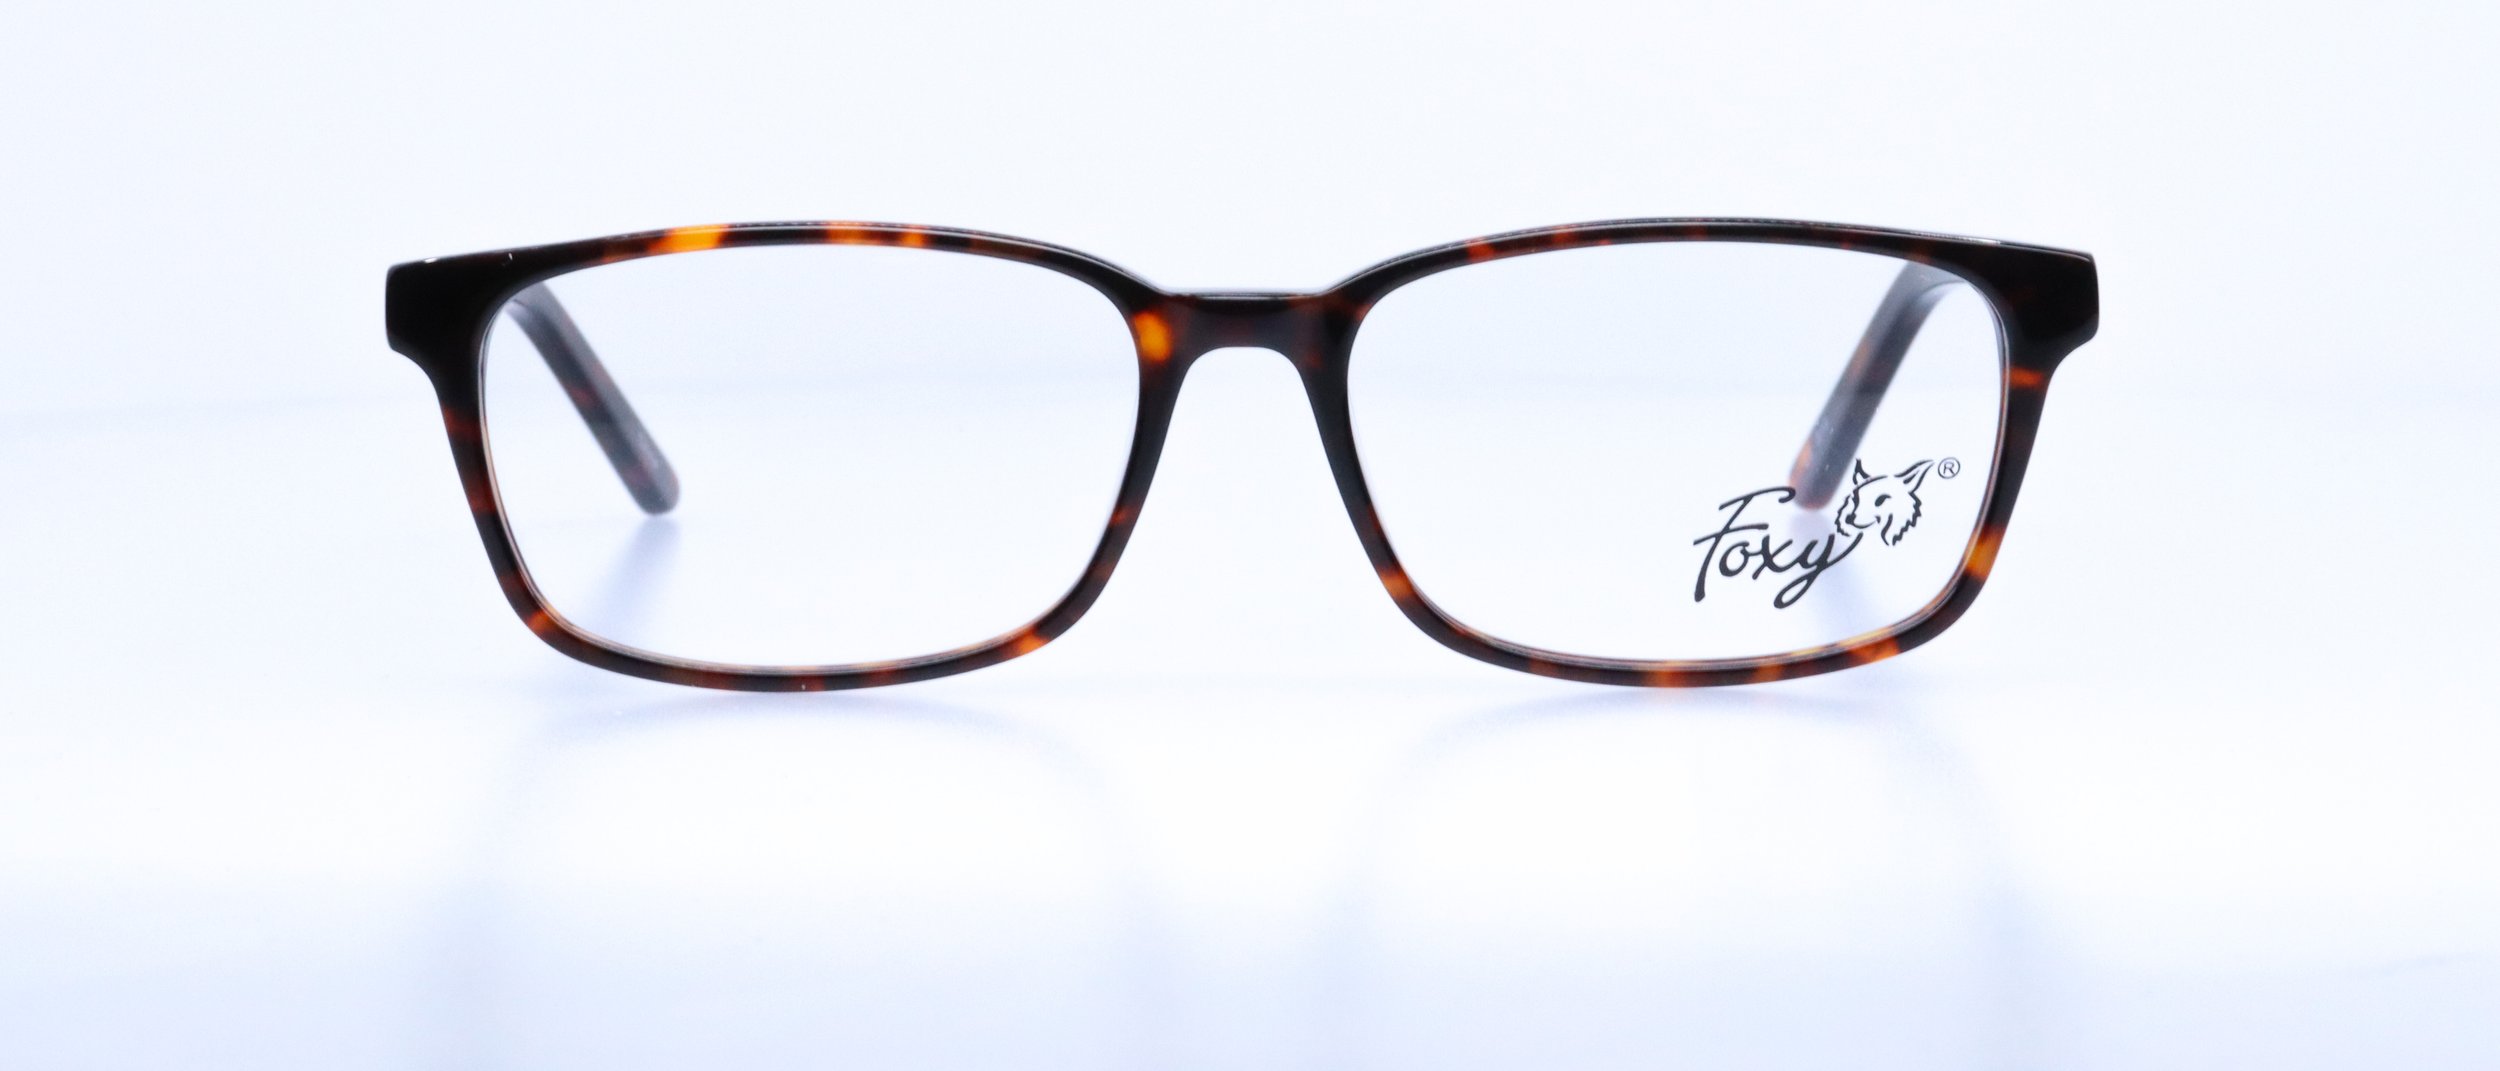  Bailey: 53-16-140, Available in Brown or Tortoise 